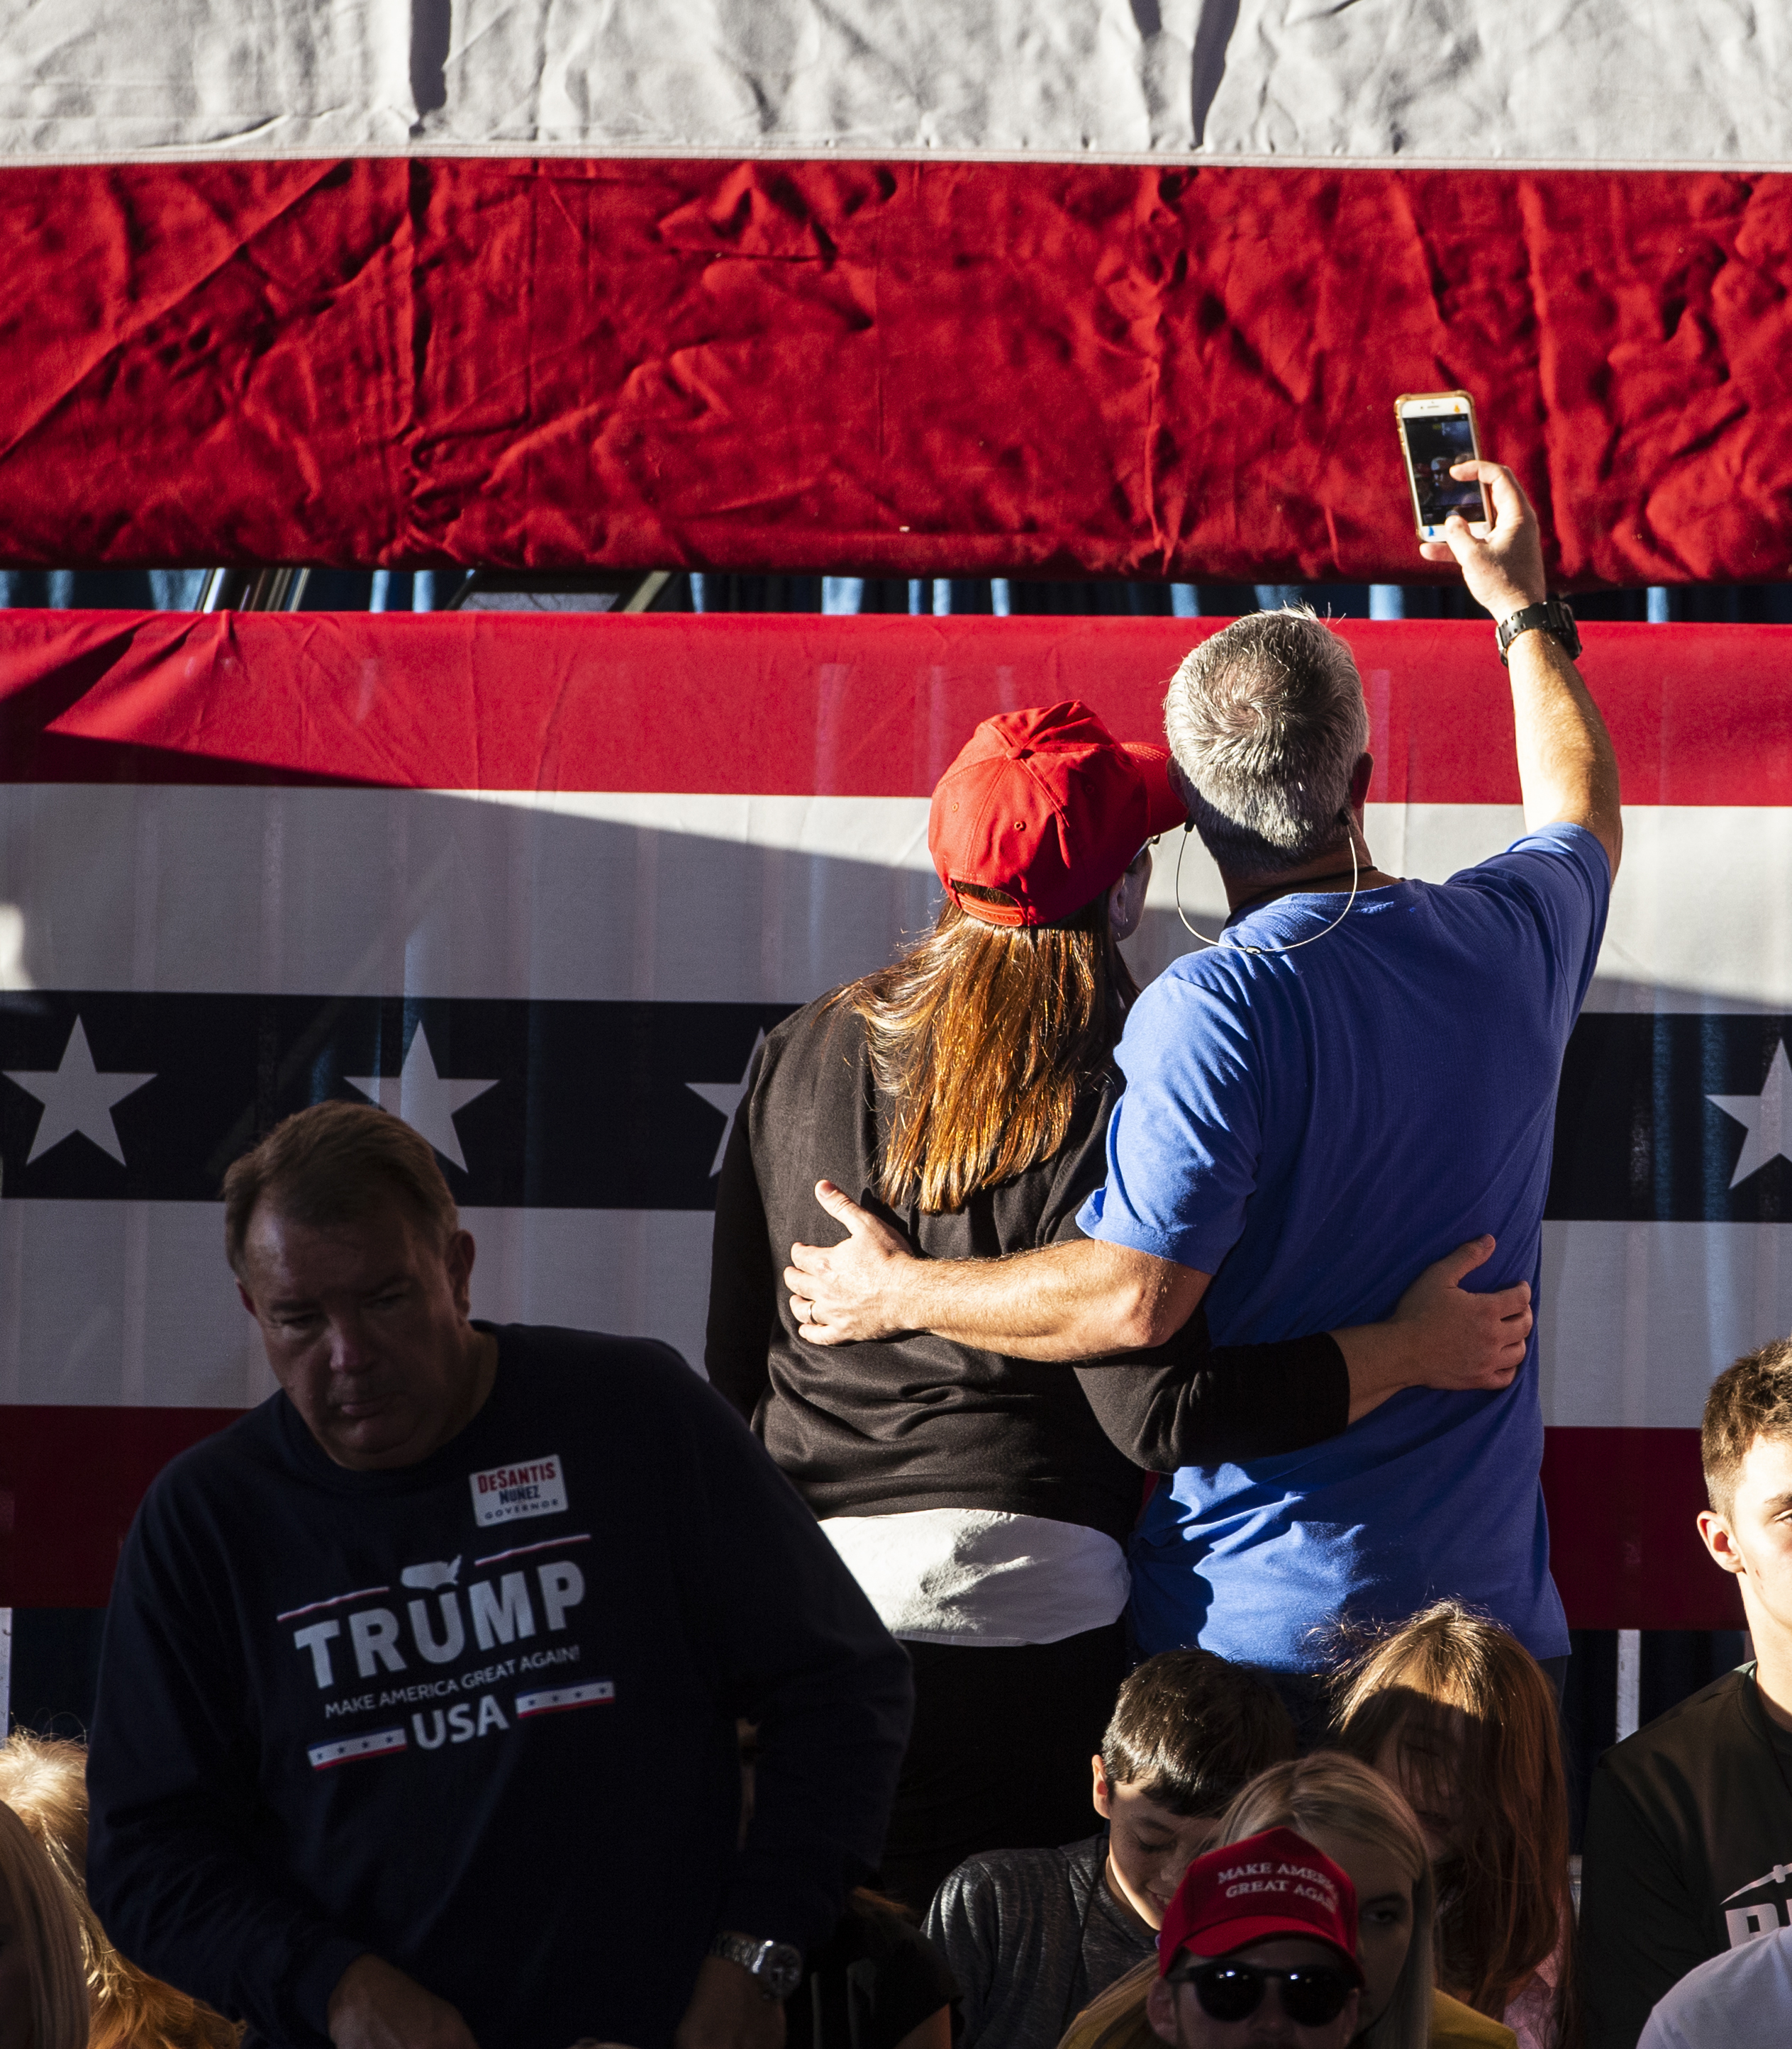 Trump supporters take a selfie.